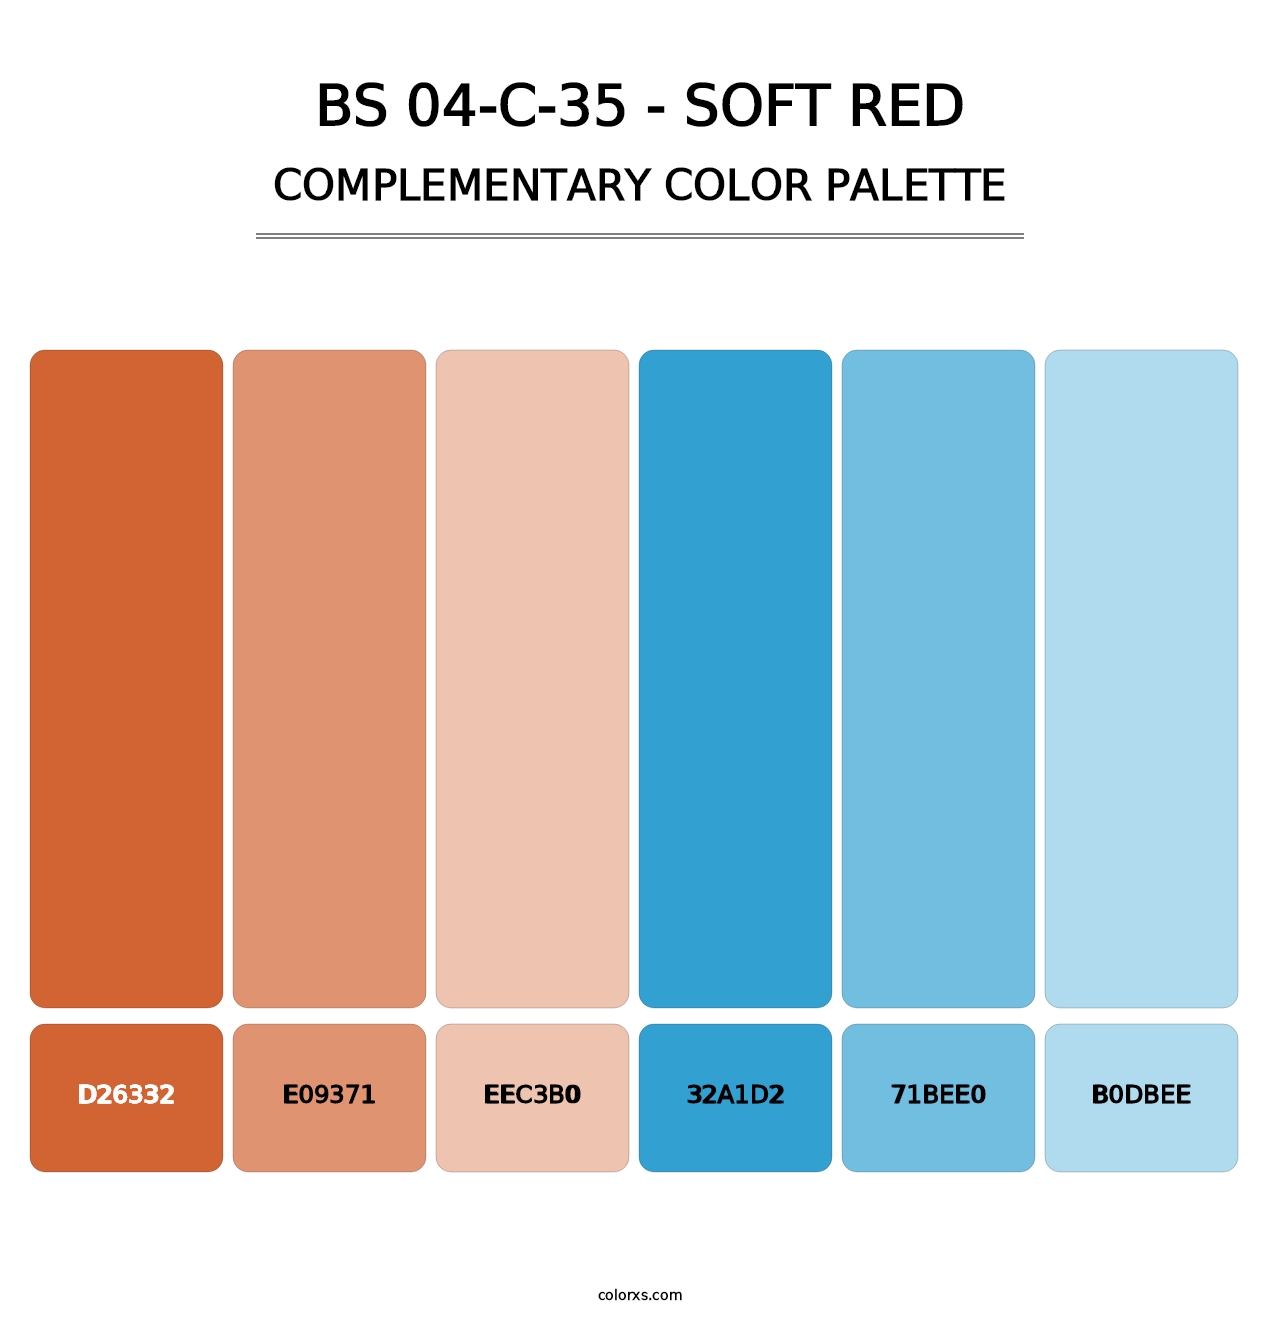 BS 04-C-35 - Soft Red - Complementary Color Palette